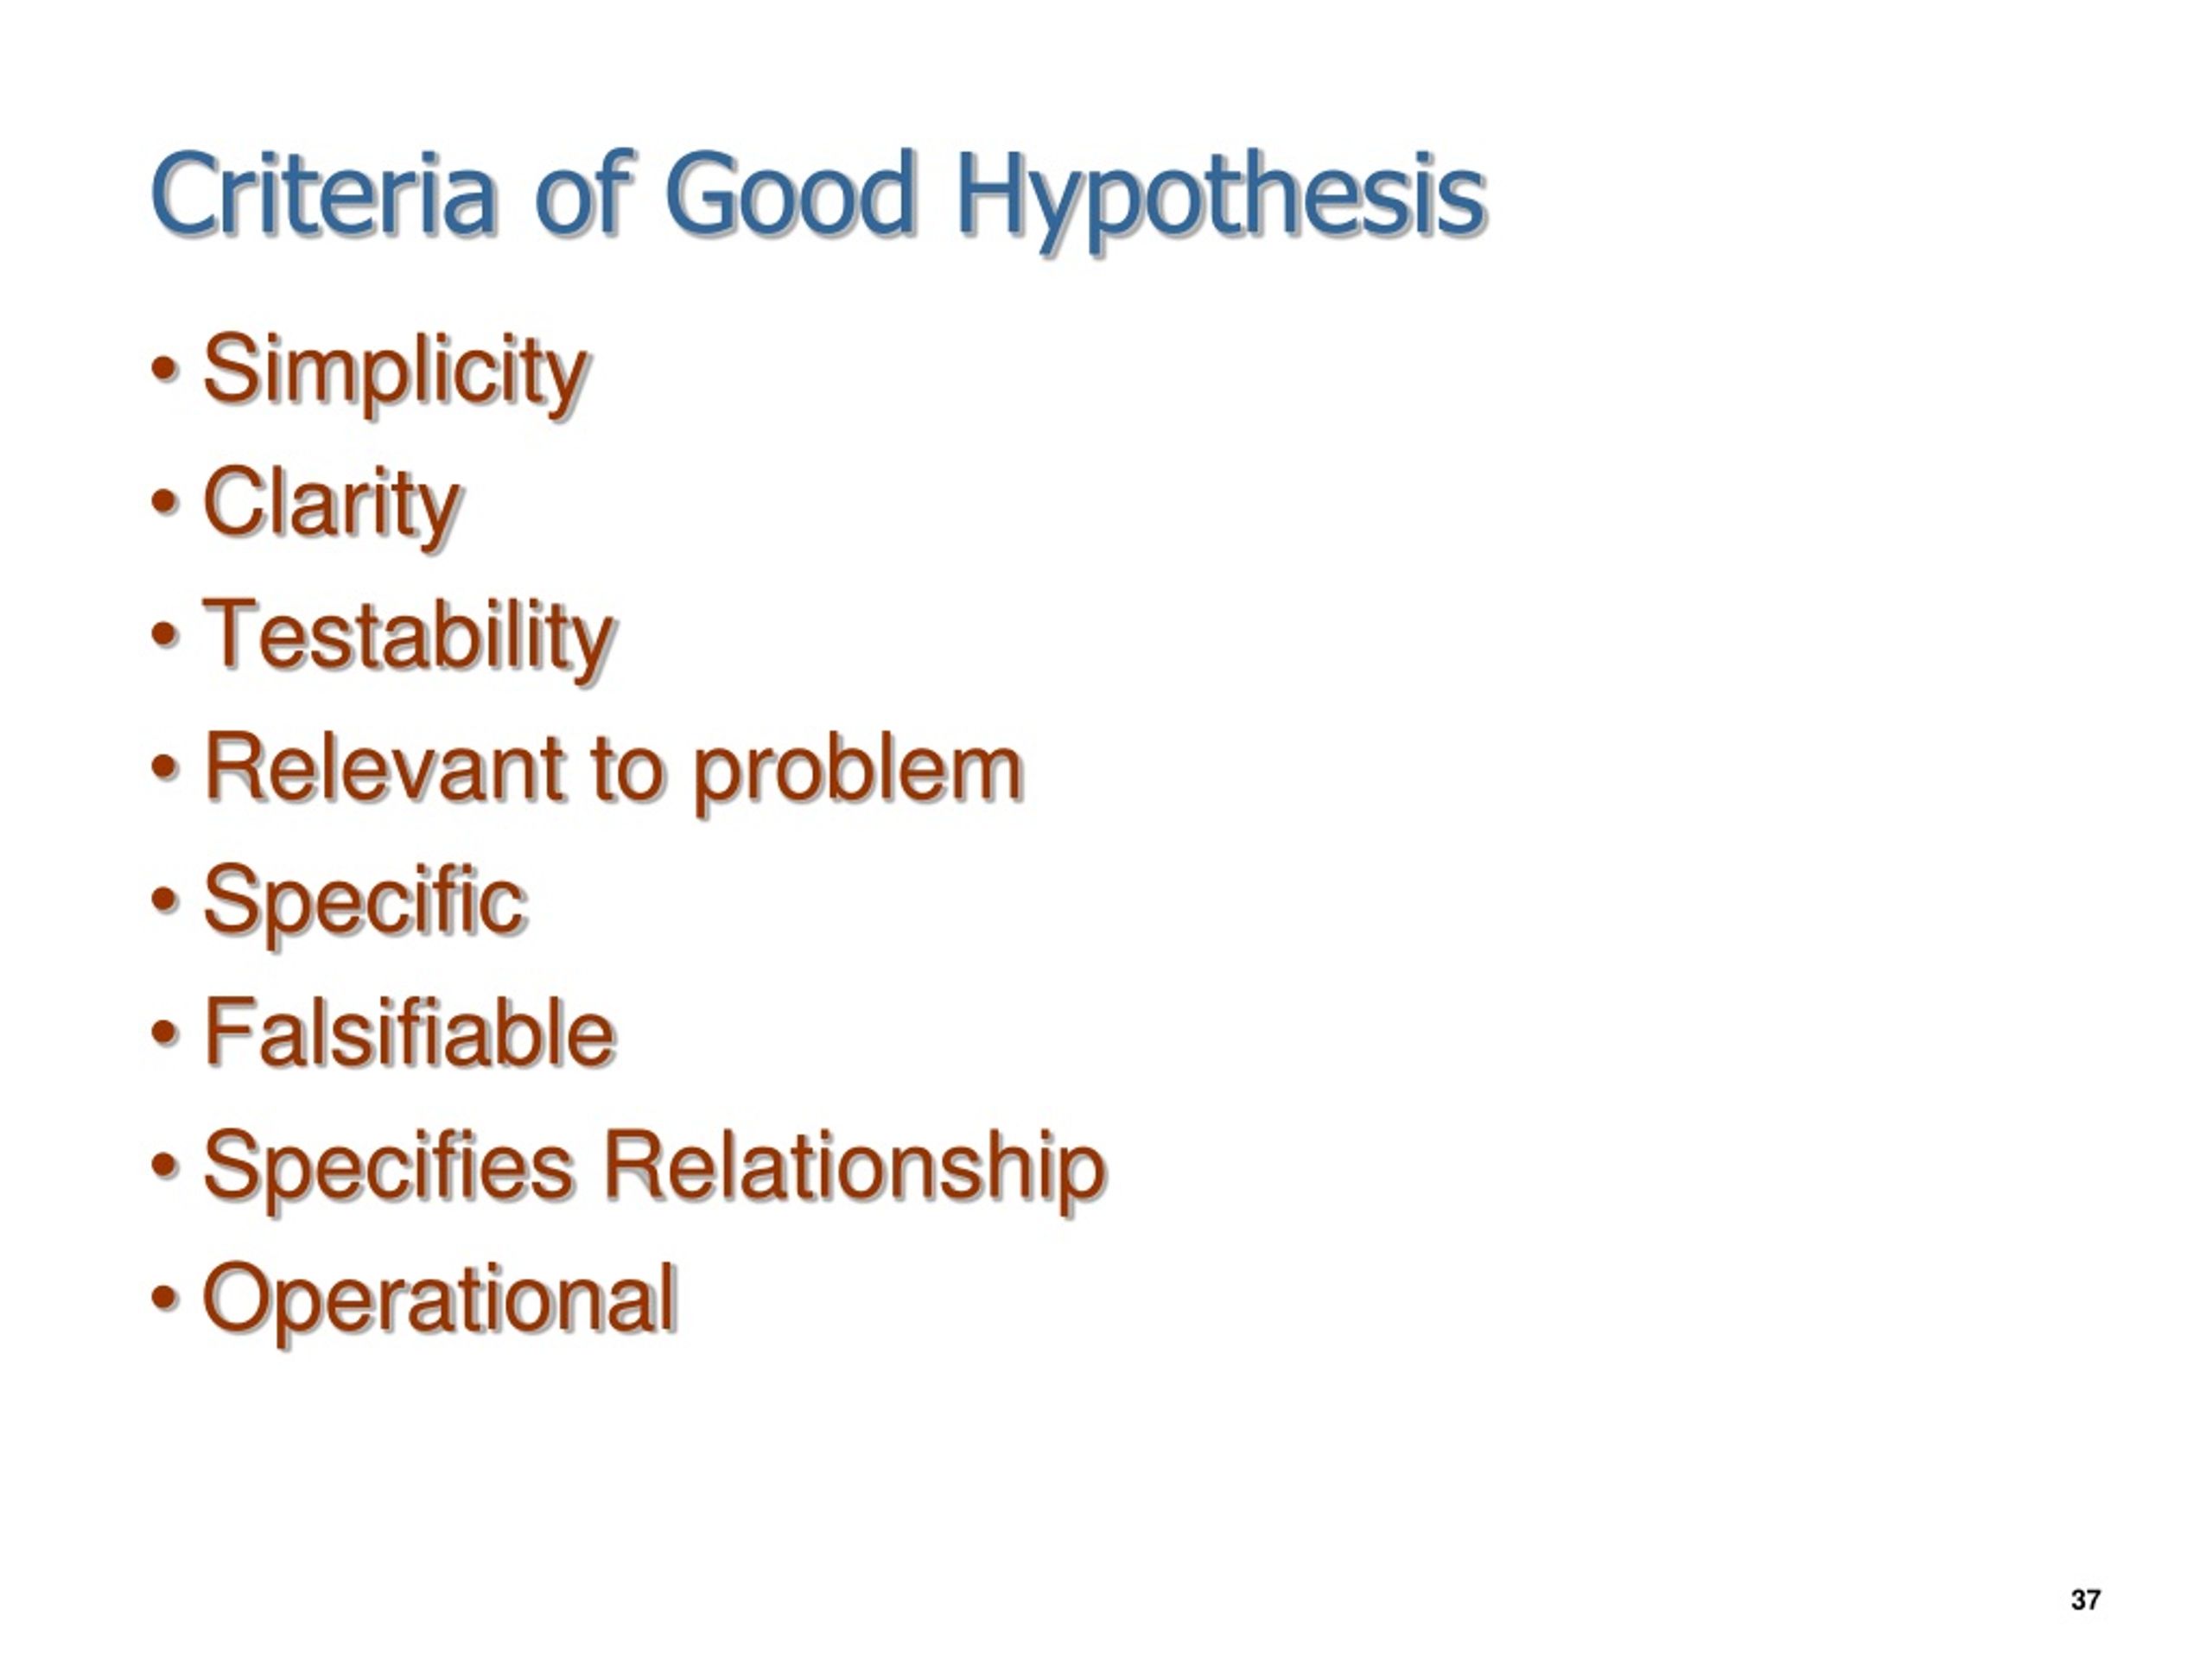 itemize the criteria for stating good hypothesis